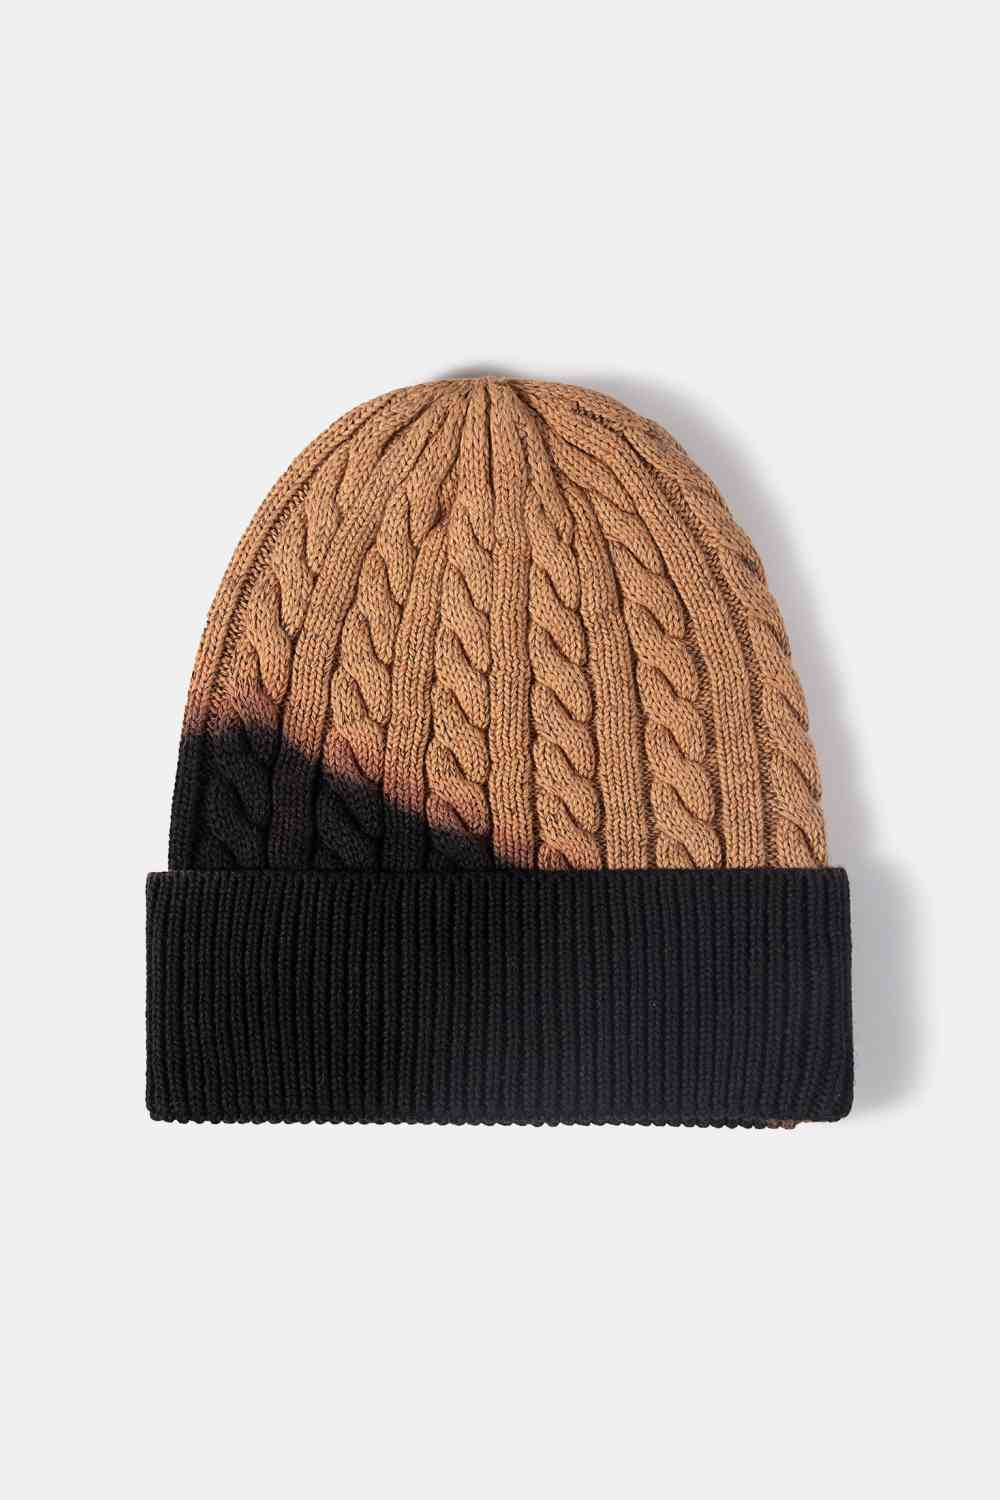 Contrast Tie-Dye Cable-Knit Cuffed Beanie